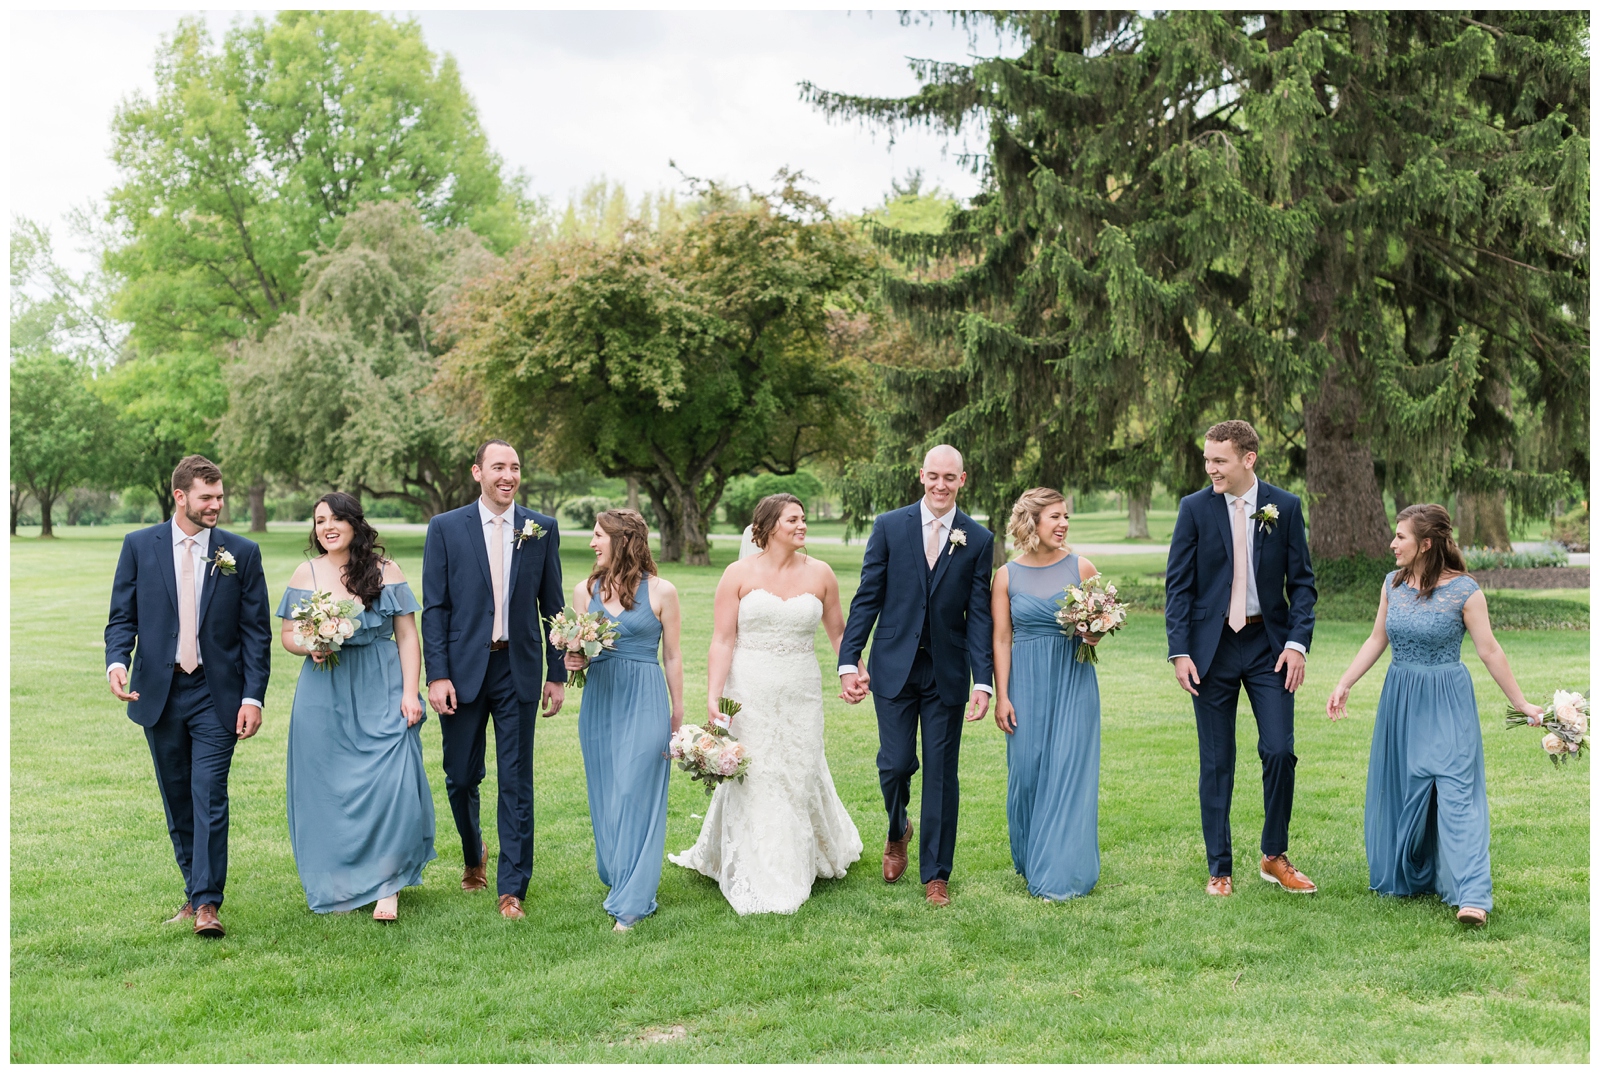 bride and groom walk beside bridesmaids in blue gowns and groomsmen in navy suits